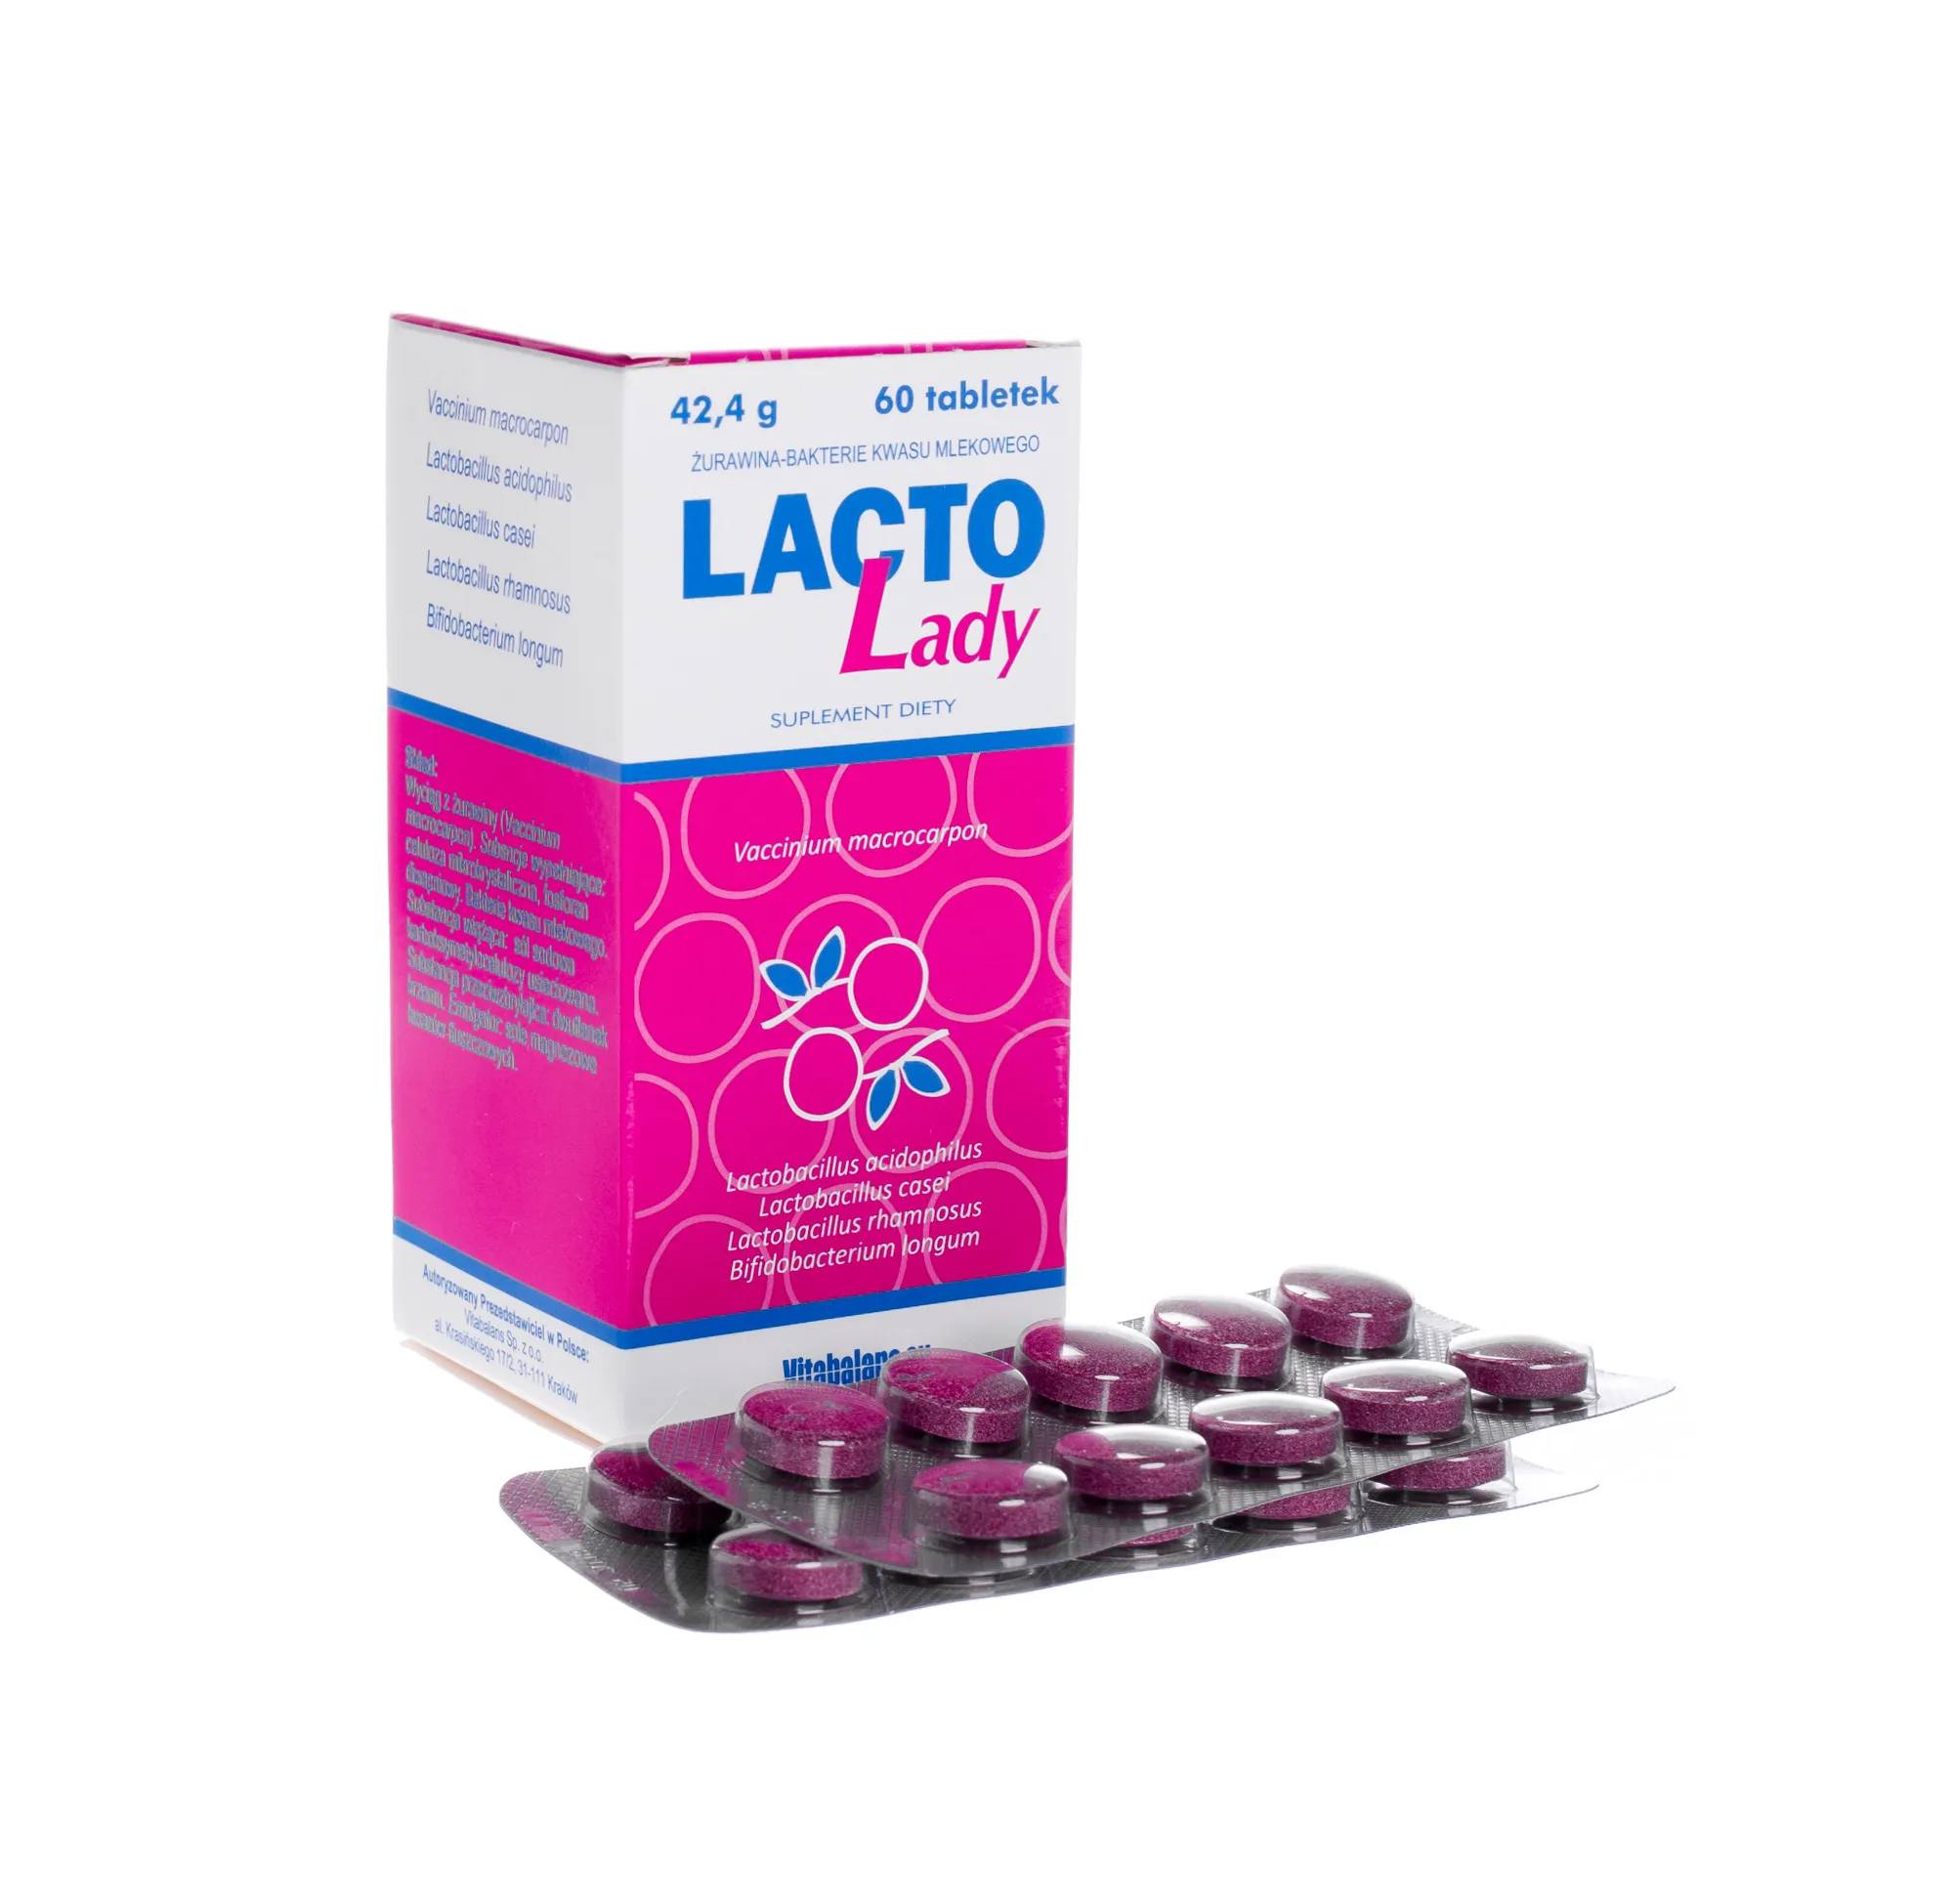 Lacto Lady, suplement diety, 60 tabletek